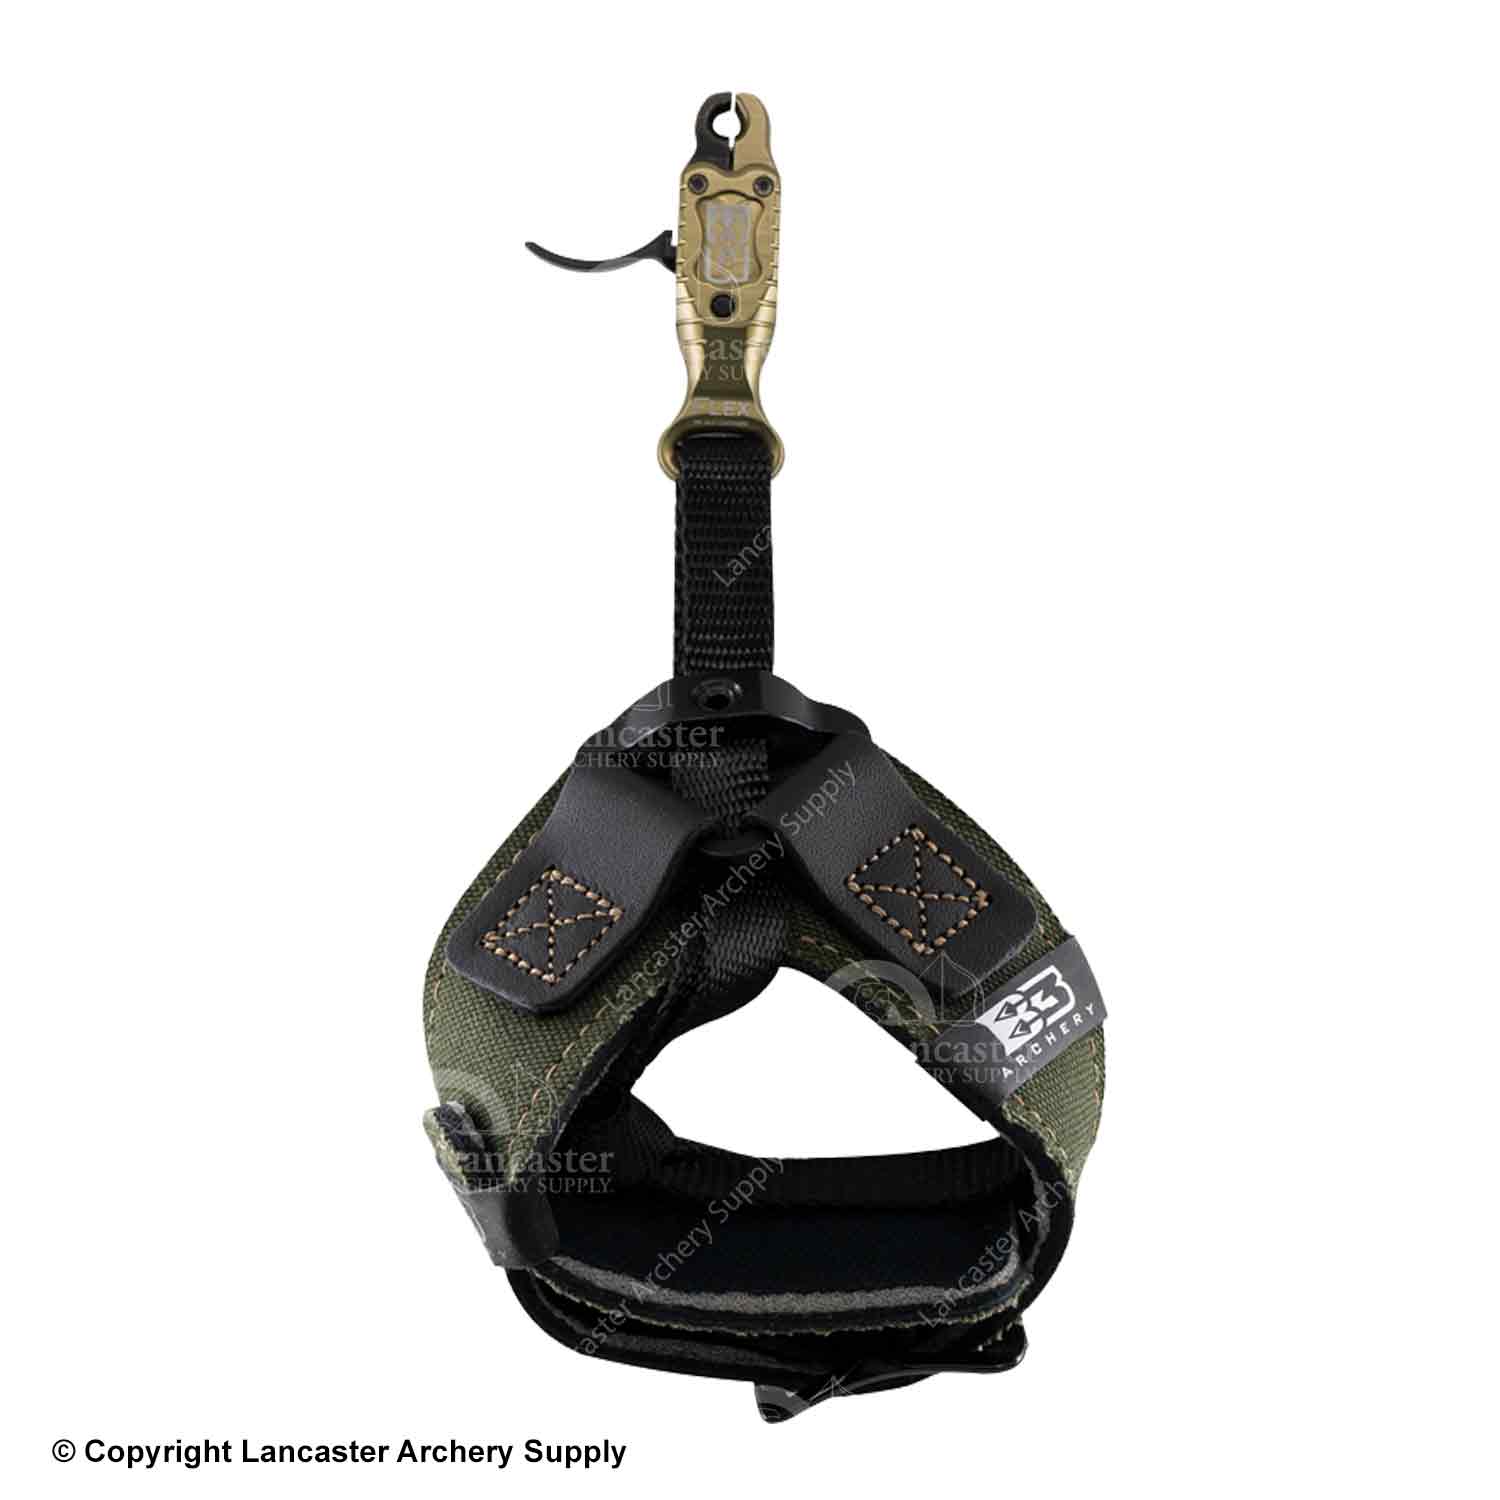 A wrist sling release with a green buckle strap, gold head, and black trigger